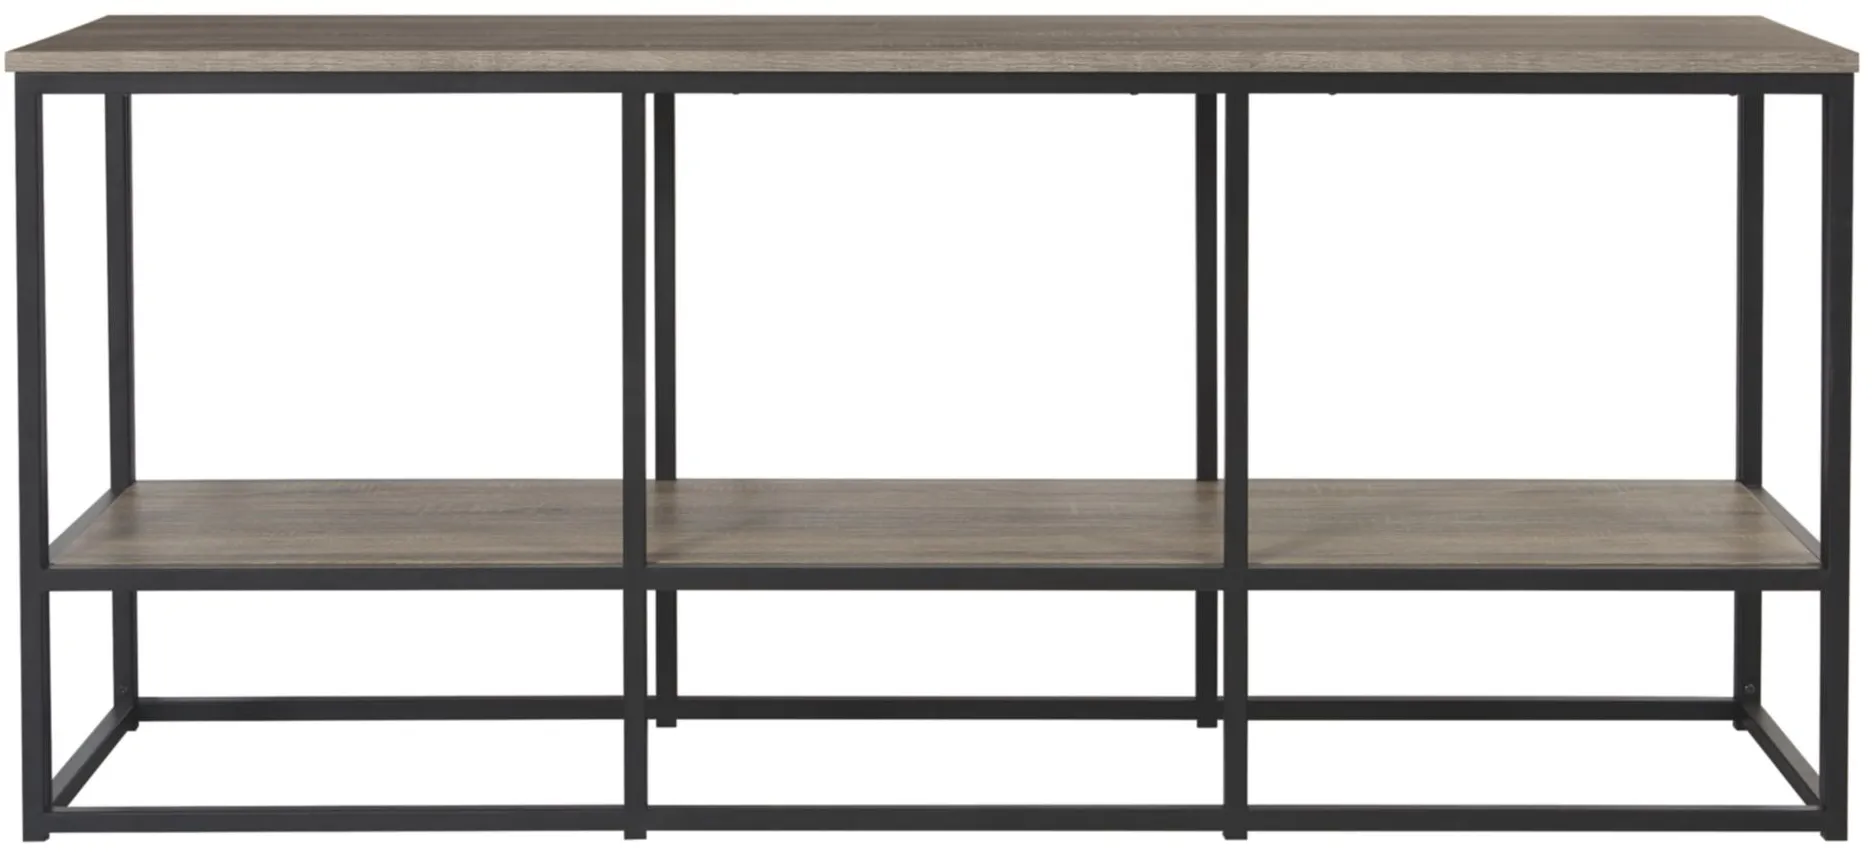 Wadeworth Contemporary Extra Large TV Stand in Brown/Black by Ashley Furniture